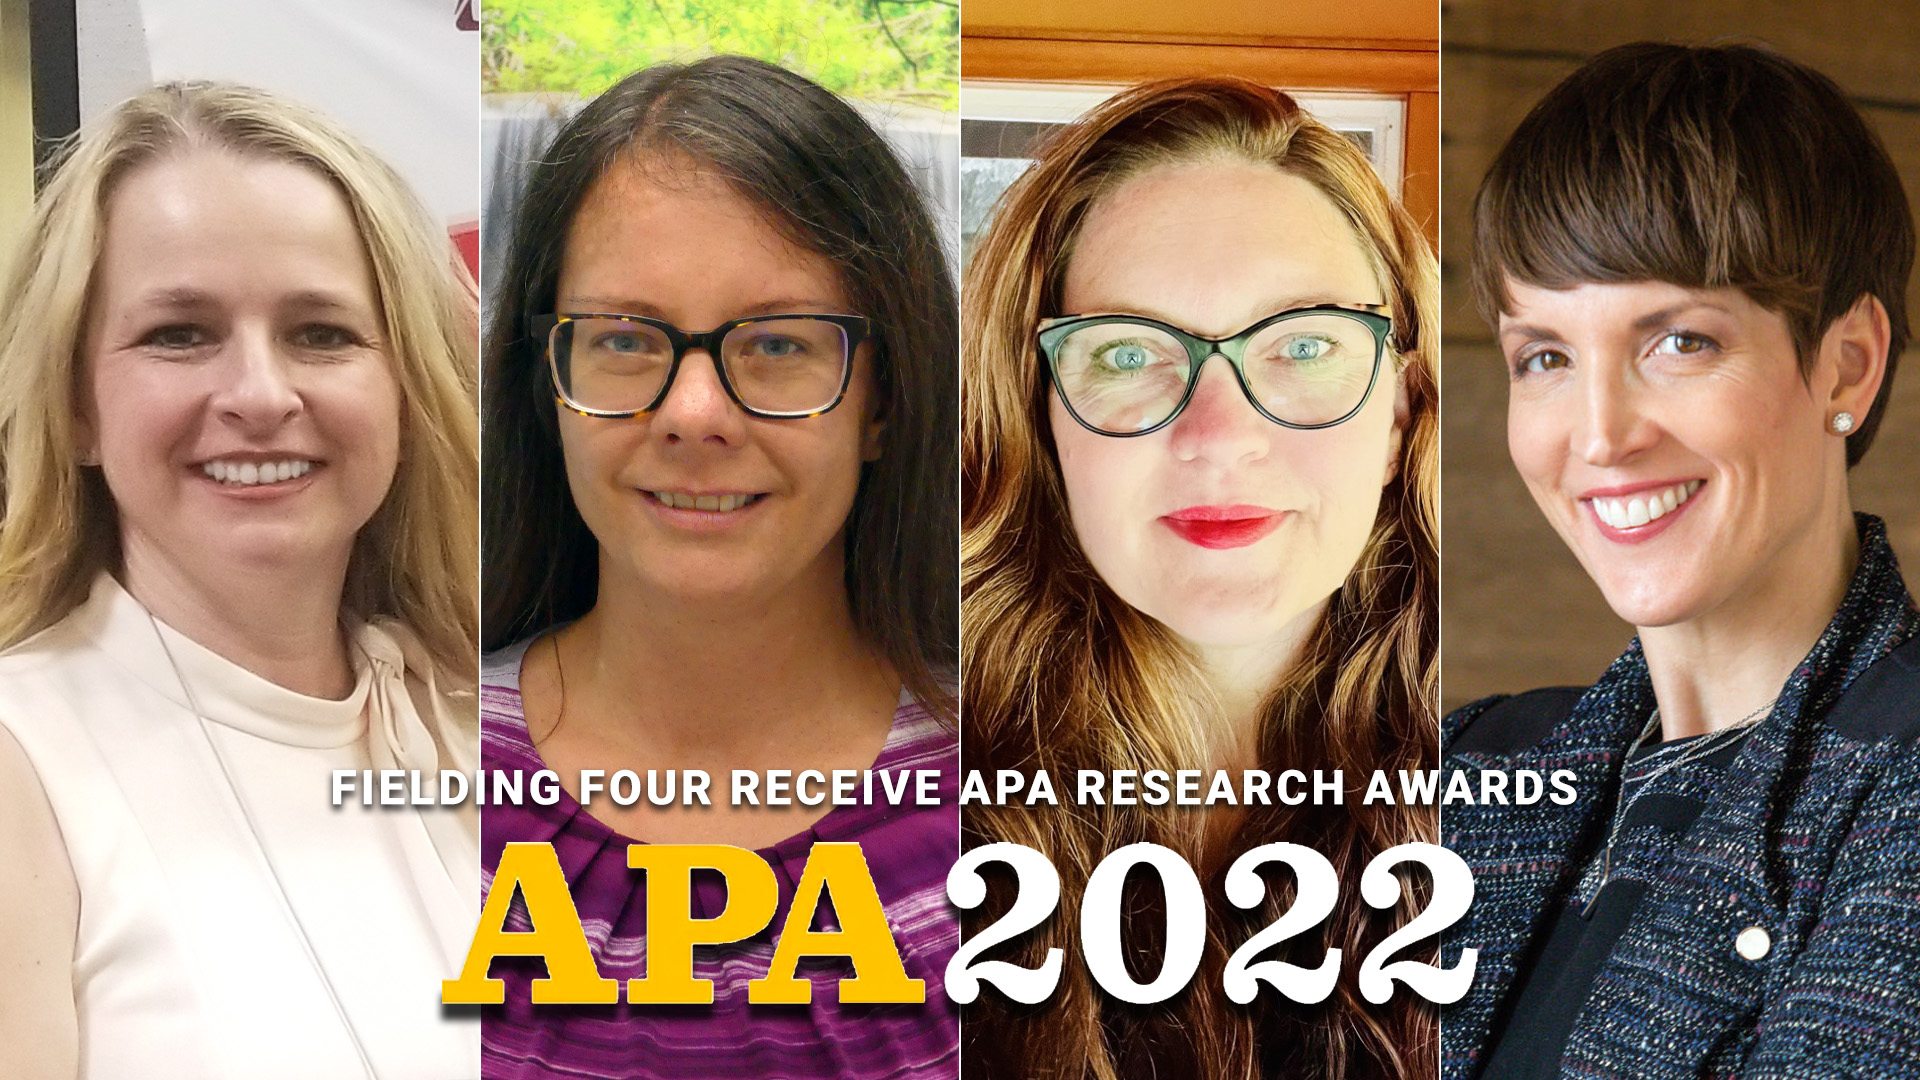 Fielding Four RECEIVE APA Research Awards